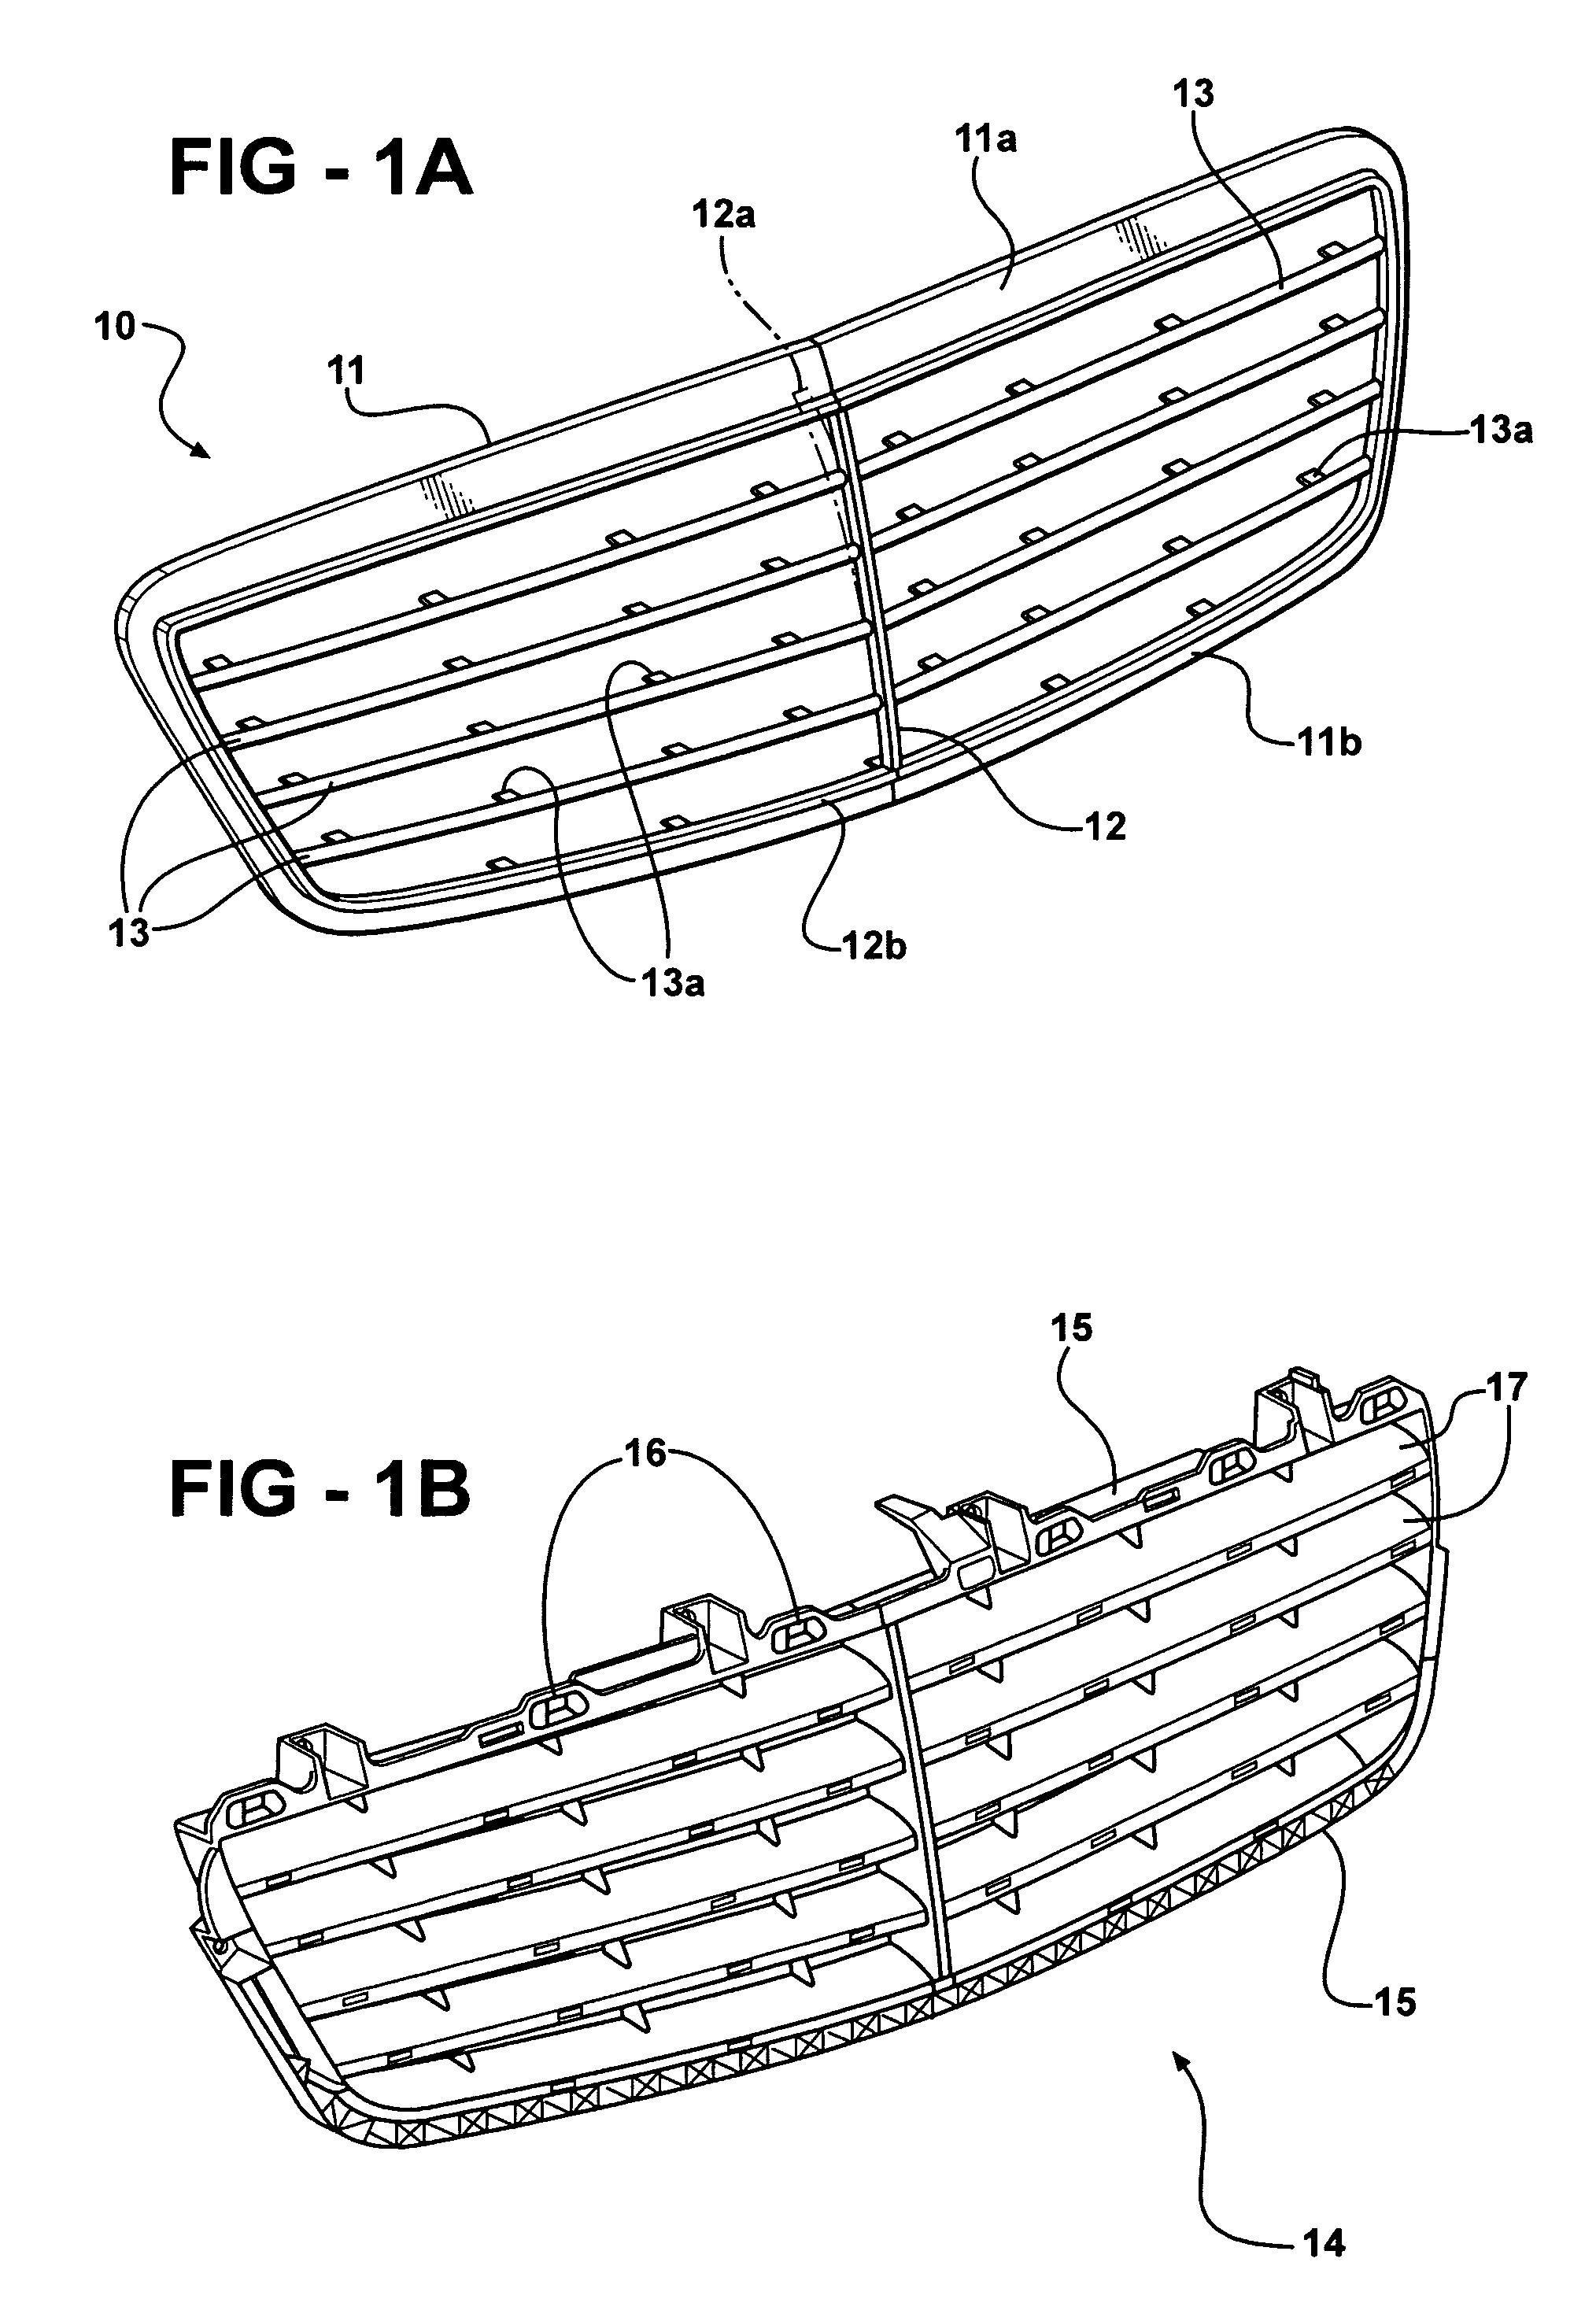 Radiator grille for mounting in a radiator grille arrangement and method of producing it